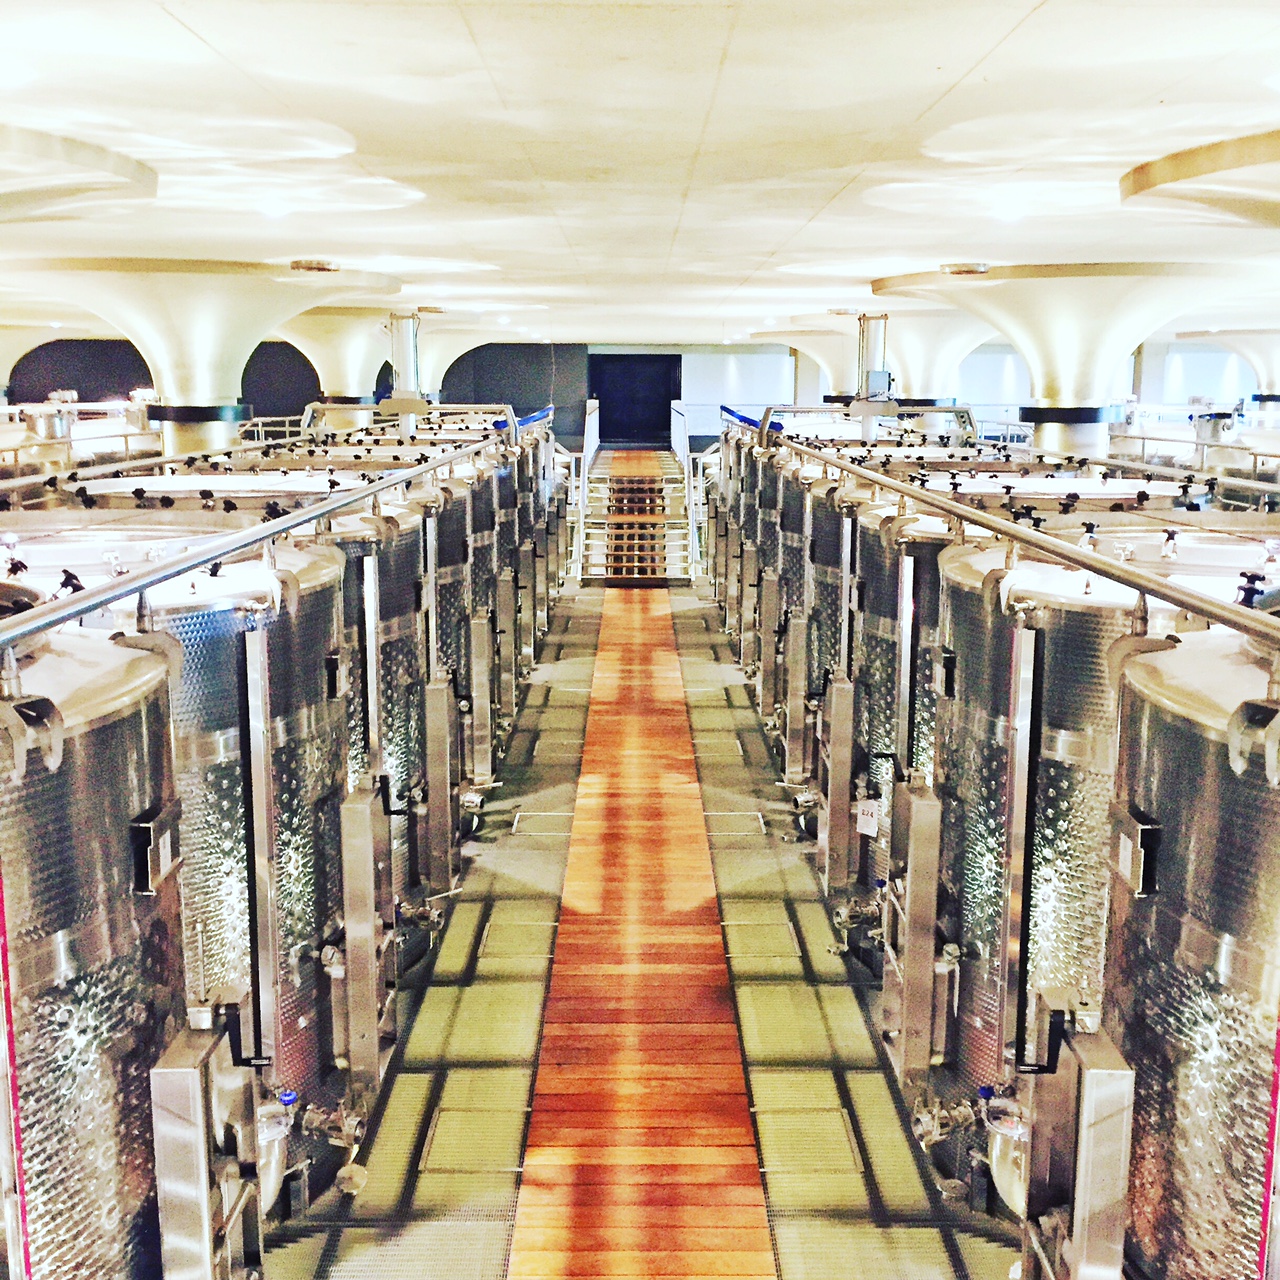 A winemaker's dream: the latest technology in the vinification cellars.